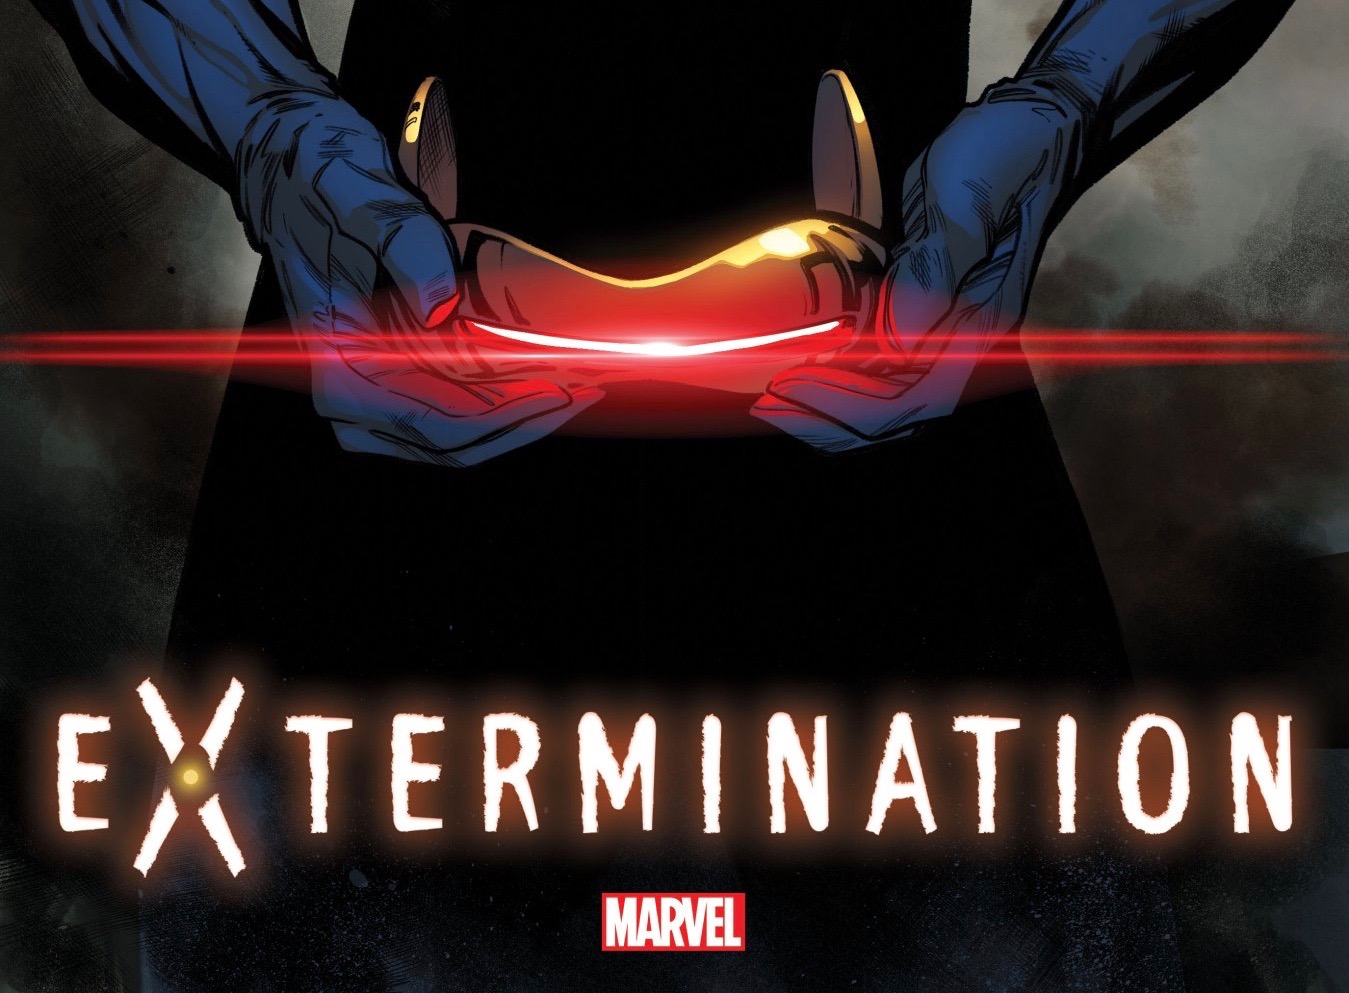 Cyclops prepares to 'Set It Right' in 'Extermination' - But what could 'it' be?